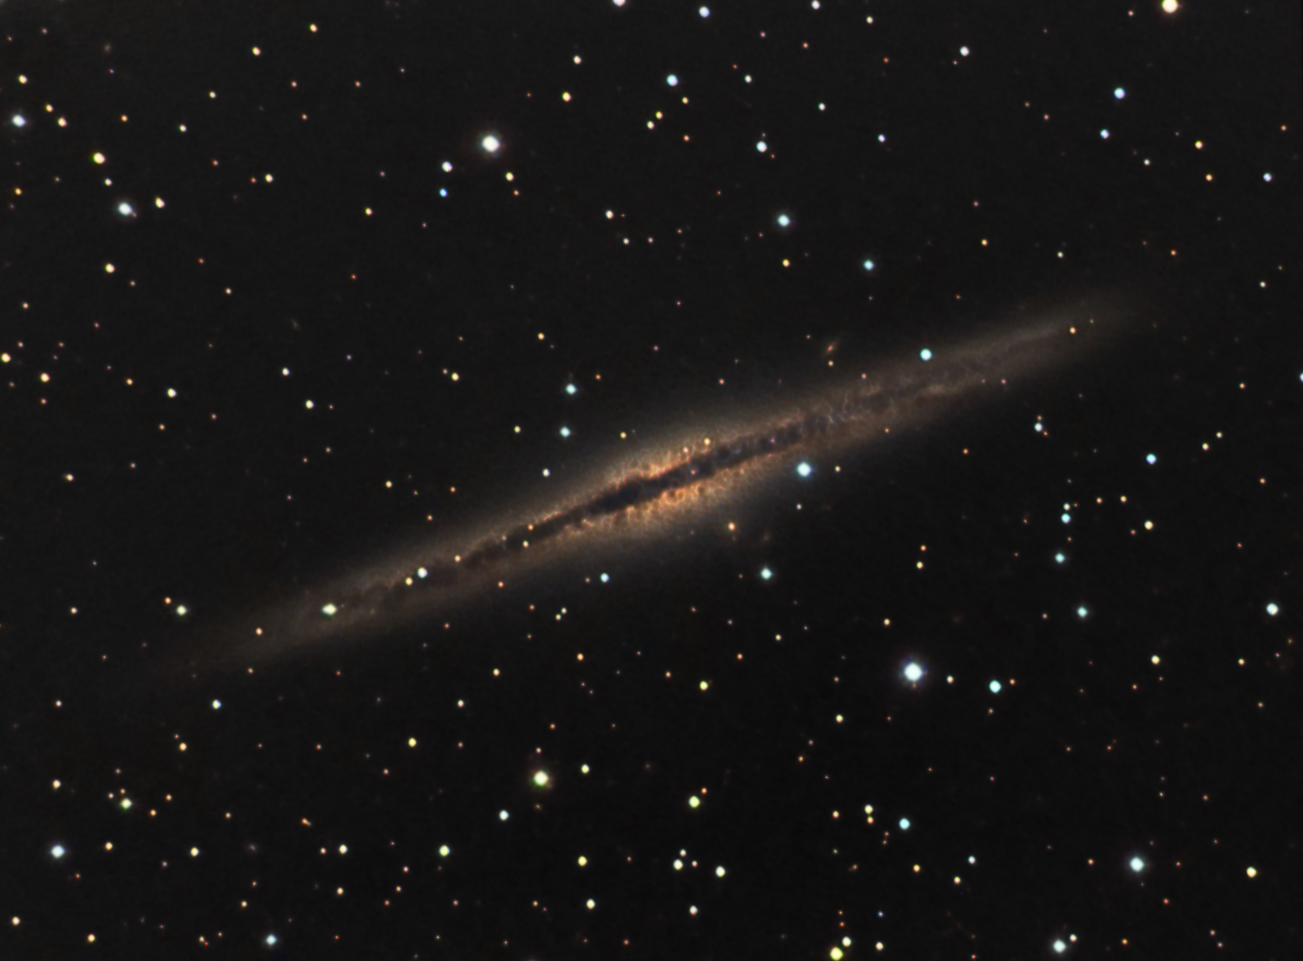 NGC 891 also called Caldwell 23